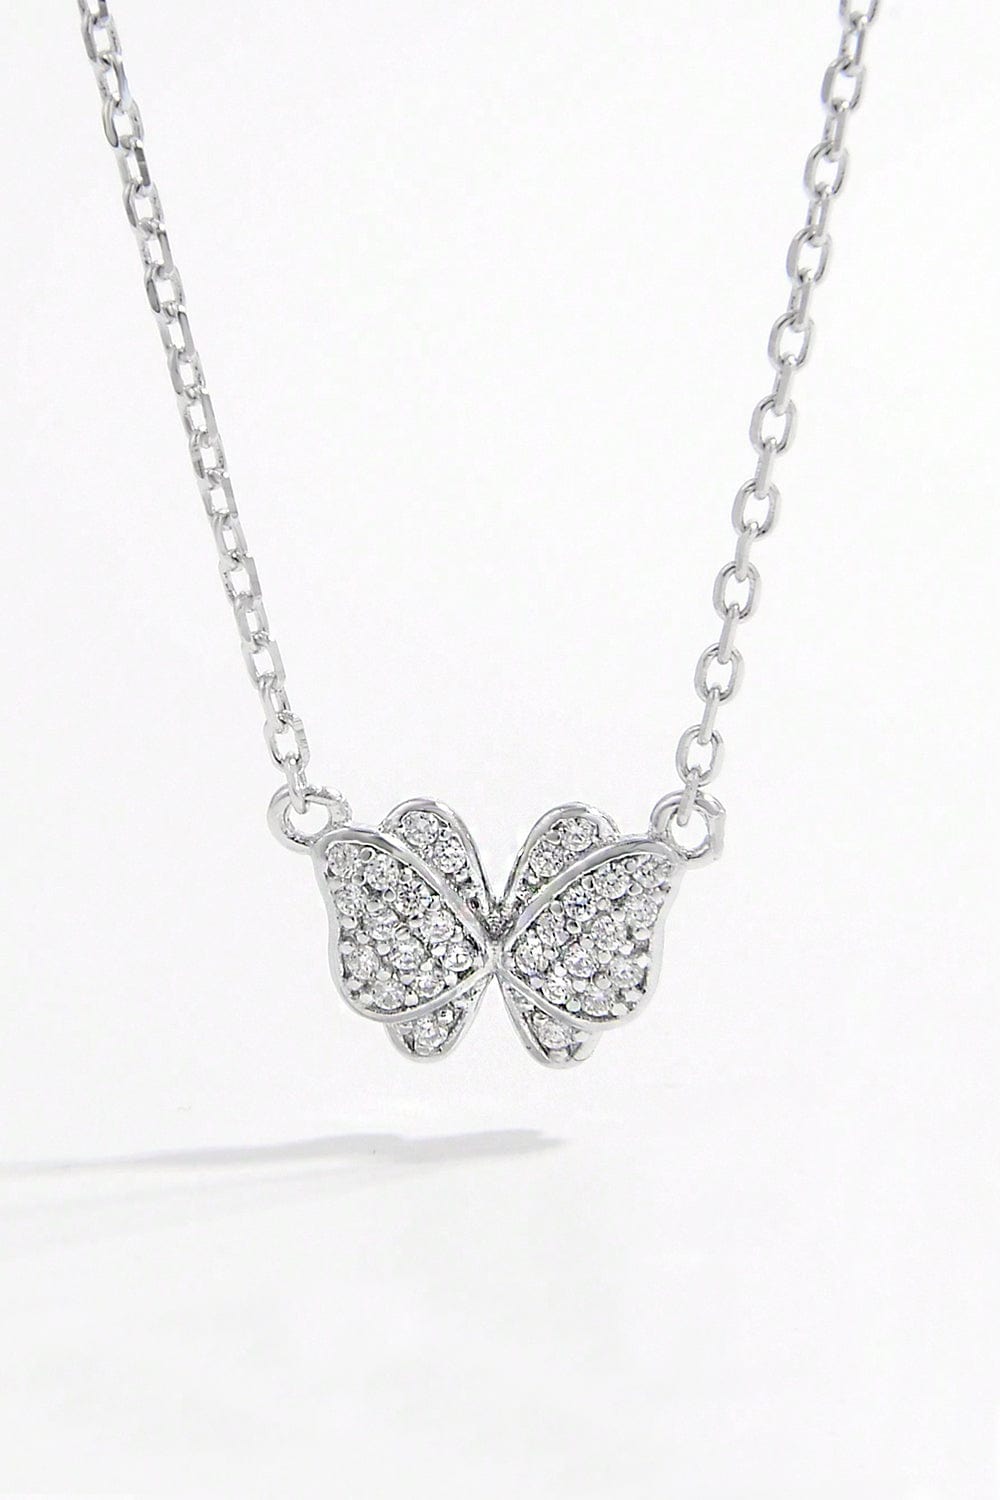 925 Sterling Silver Zircon Butterfly Pendant Necklace. The pendant is crafted in the shape of a butterfly and adorned with sparkling zircon gemstones. The necklace chain complements the pendant, showcasing its delicate beauty. This accessory exudes elegance and charm, perfect for adding a touch of sophistication to any outfit.